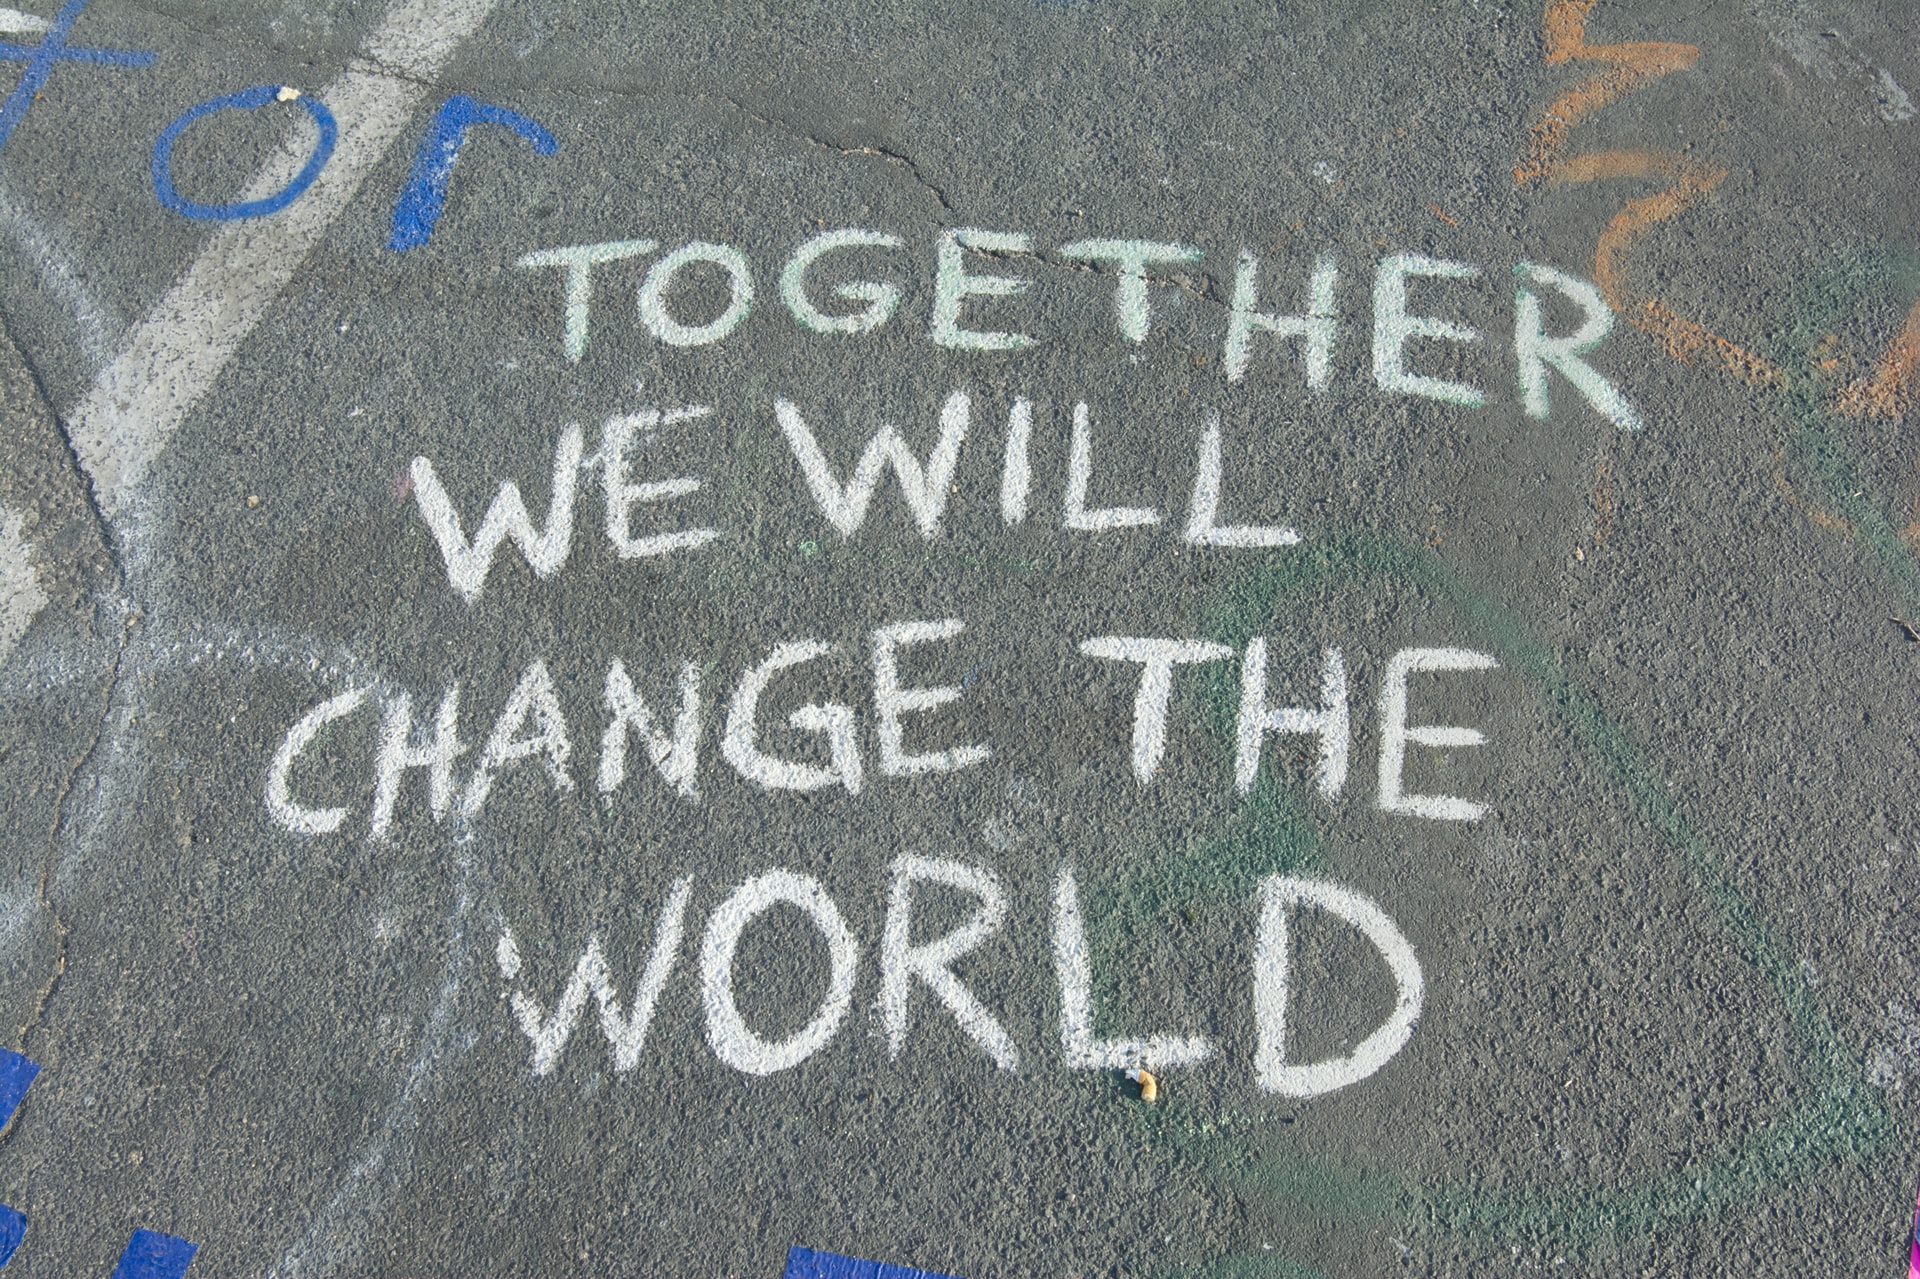 The image shows a writing that says together we will change the world.